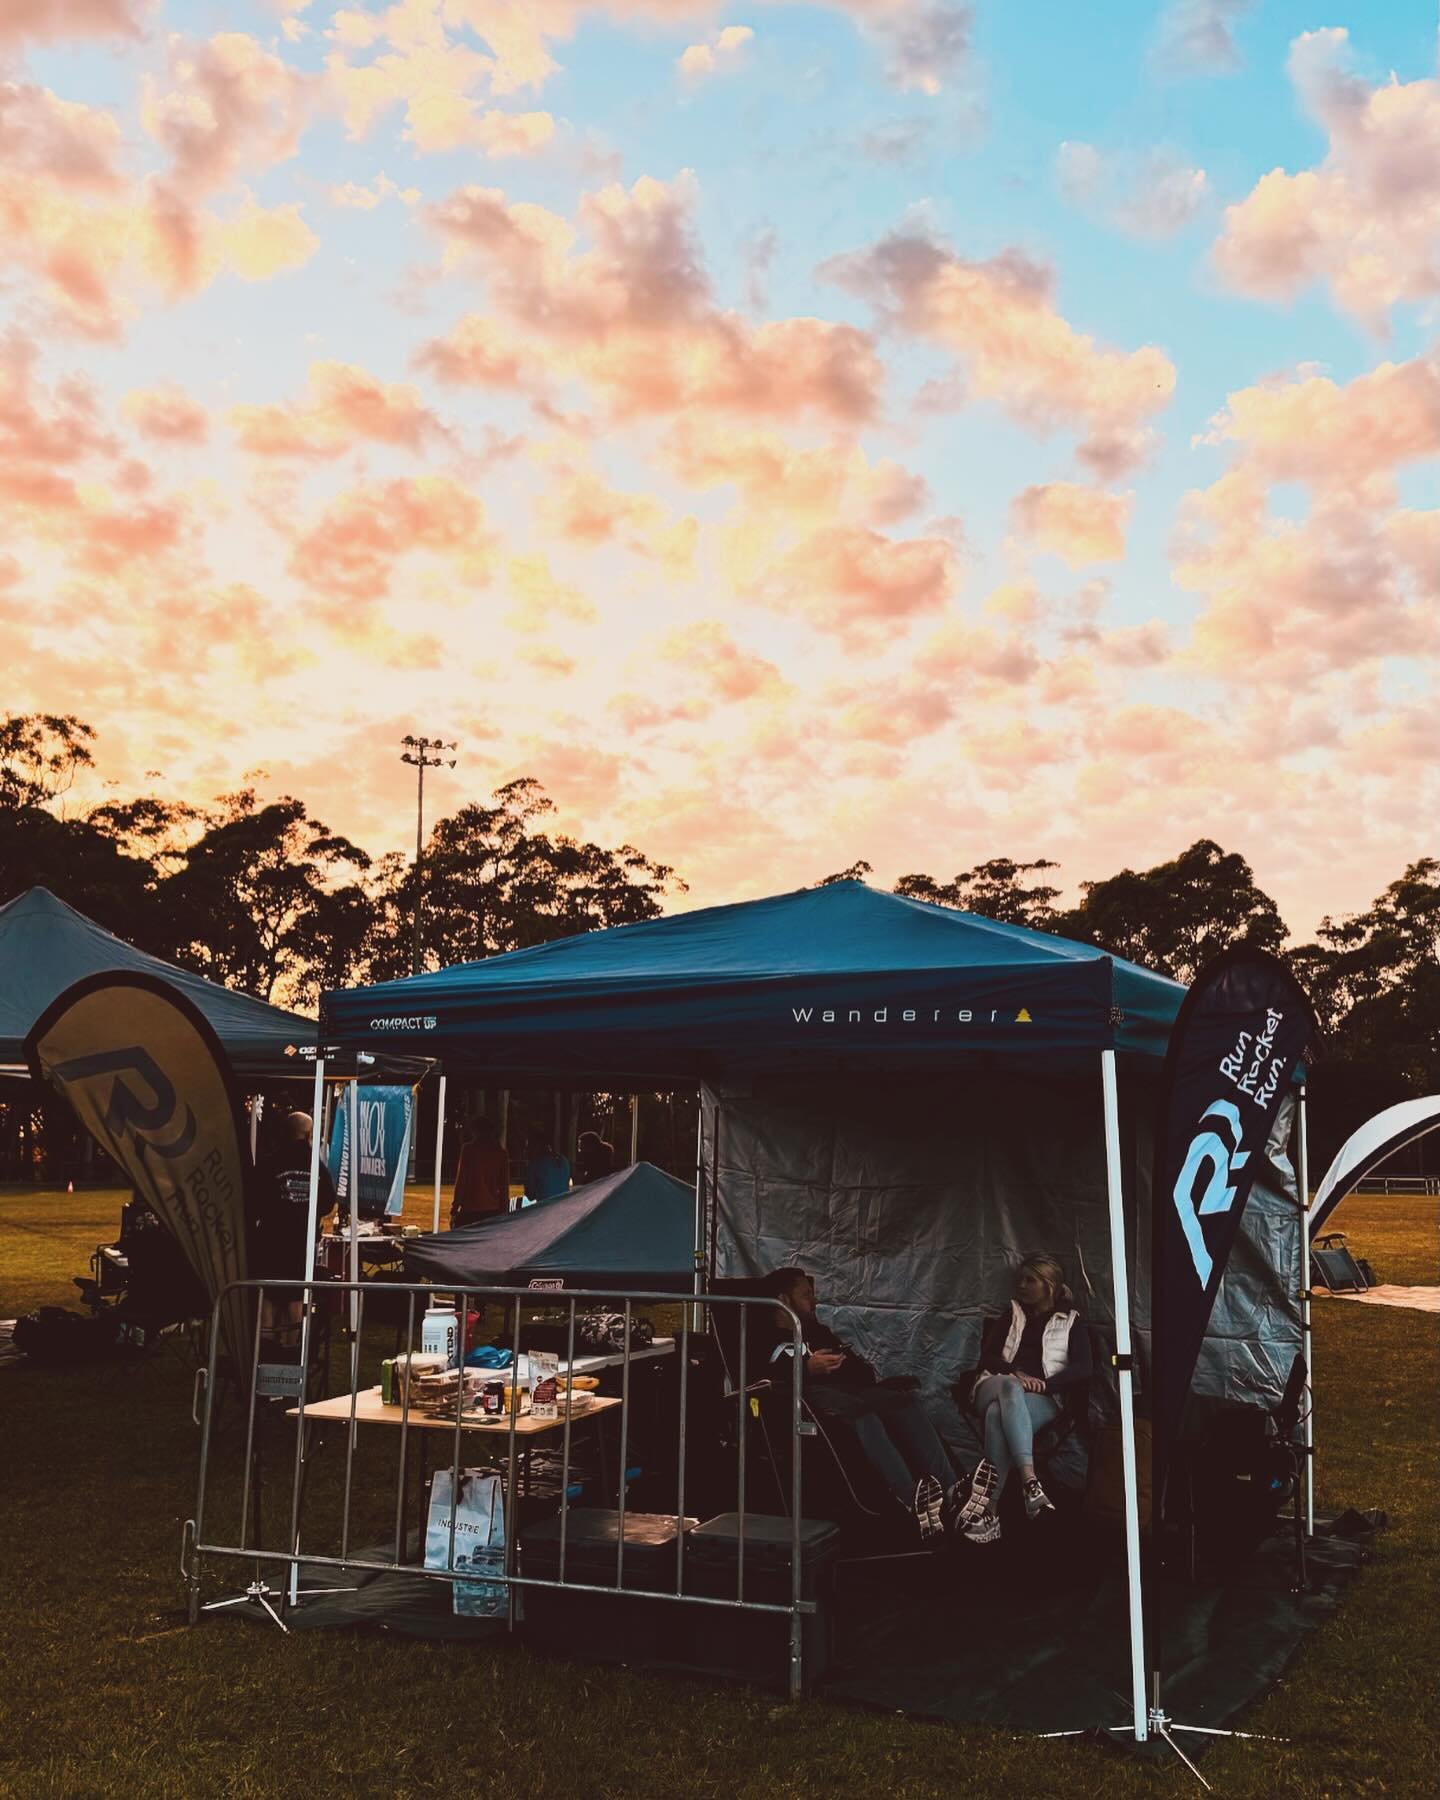 Run Rocket Run, set up and ready for Sydney&rsquo;s Backyard Ultra. Rodney is in great spirits and looking strong. 
@sydneysbackyardultras 

Partners
@invictusaustralia&nbsp;@momentummediaaus&nbsp;@parramattajaguarlandrover&nbsp;@simphysiotherapy&nbs